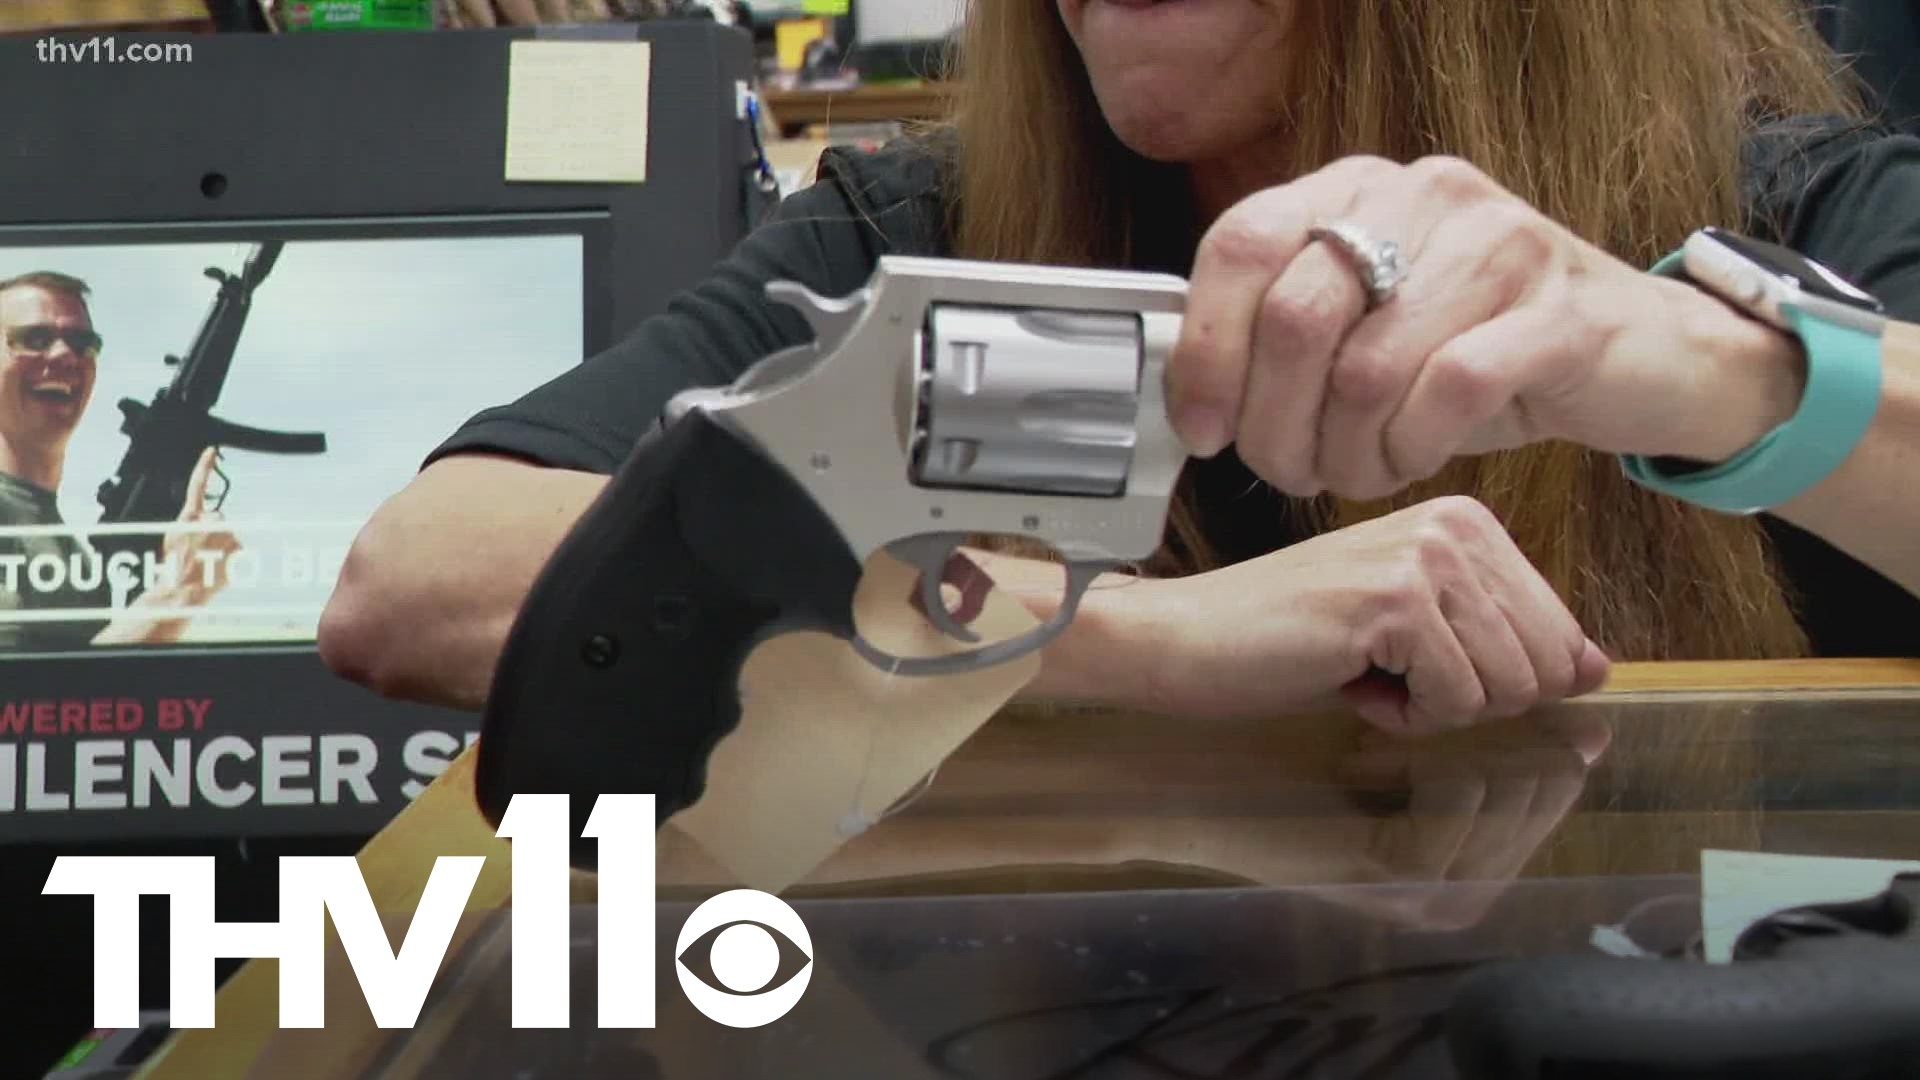 Last year, 1-in-3 first-time gun buyers were women and a gun shop owner in Arkansas has noticed the trend.